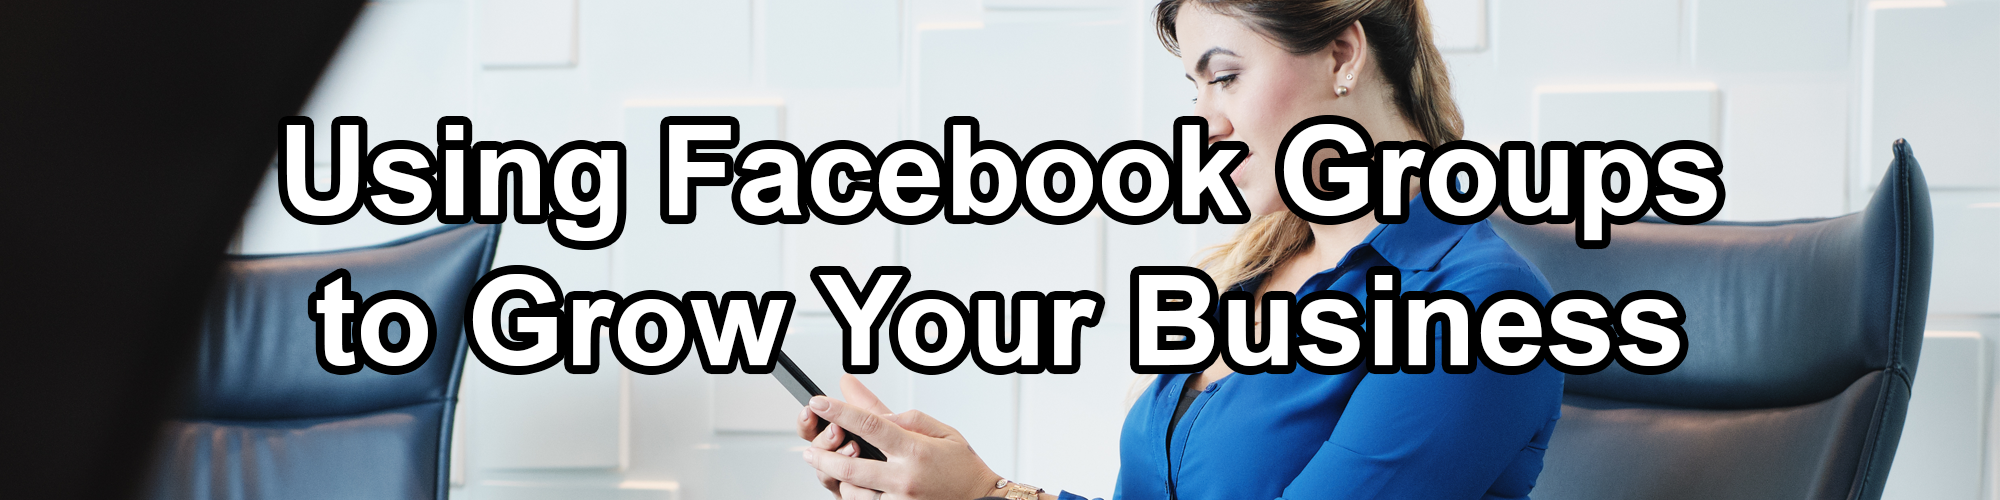 Photo: Lady in office using mobile phone. Text: Using Facebook Groups to Grow Your Business